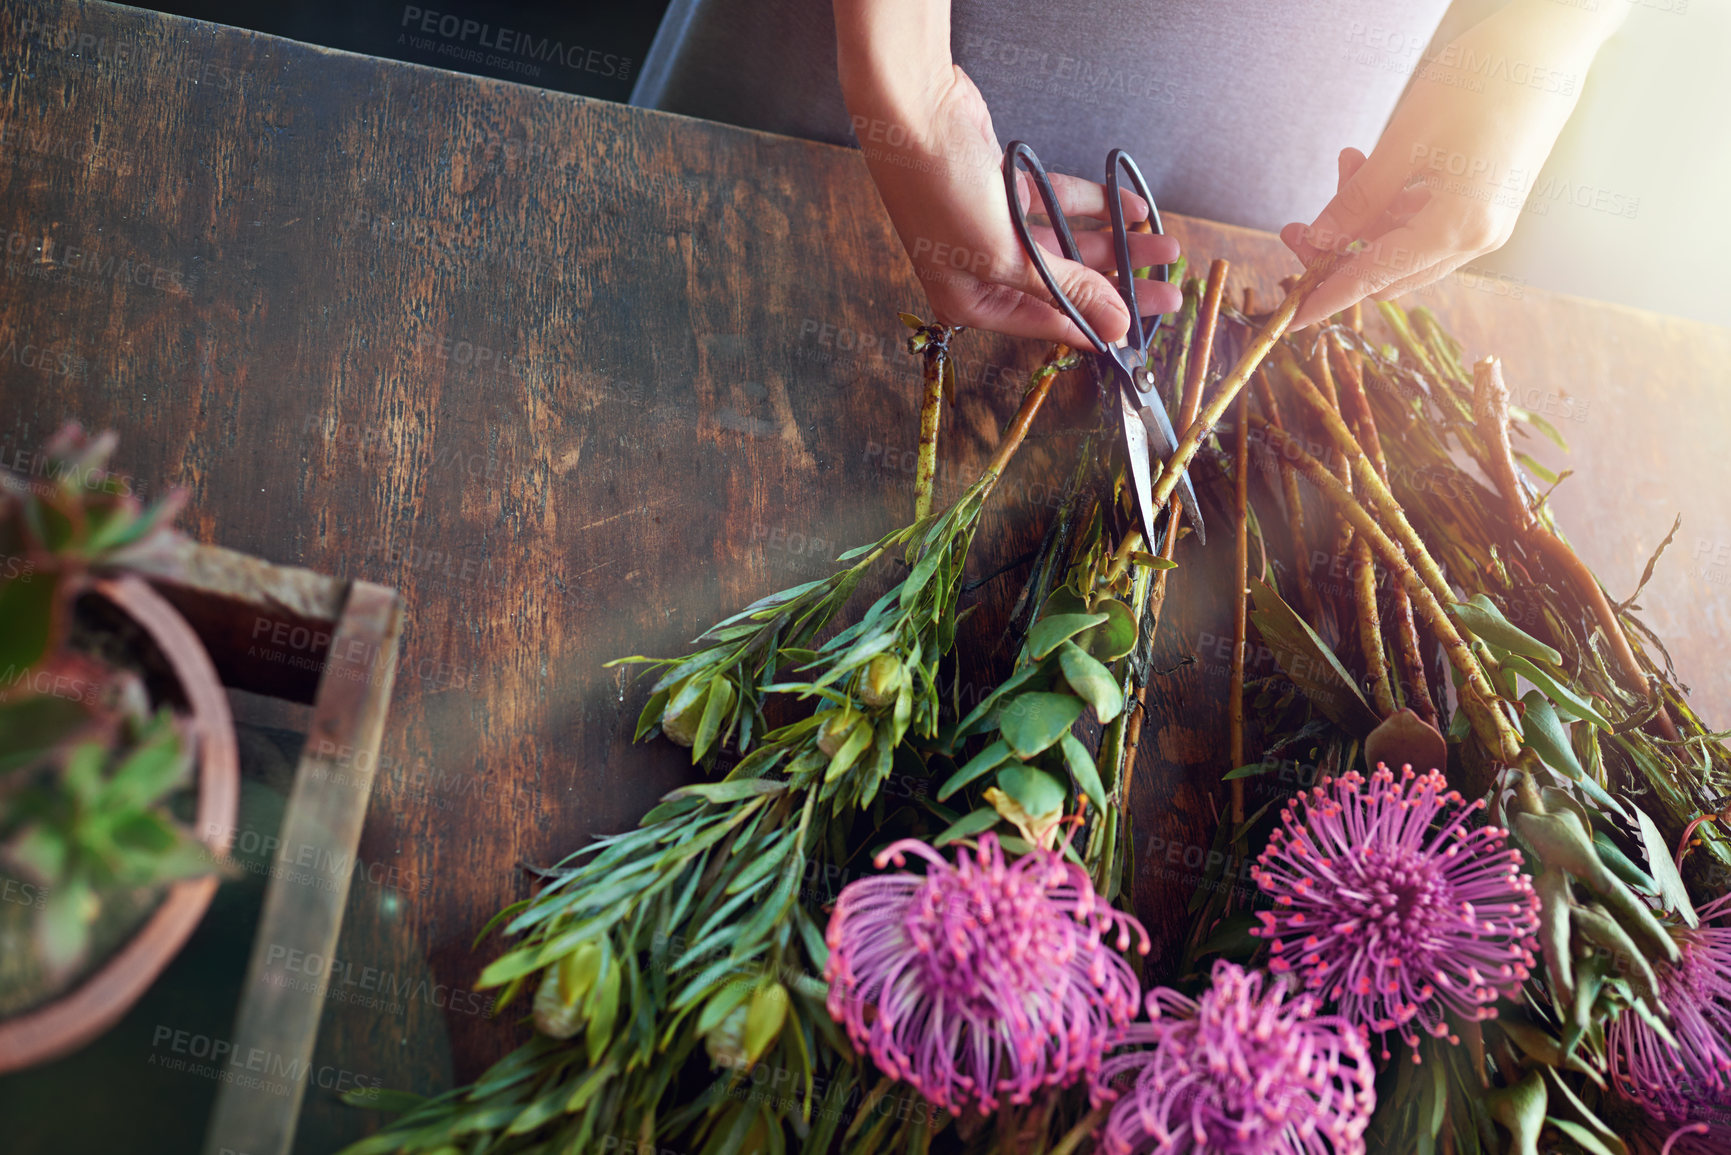 Buy stock photo Cropped shot of a pretty floral bouquet being completed on a wooden counter top
